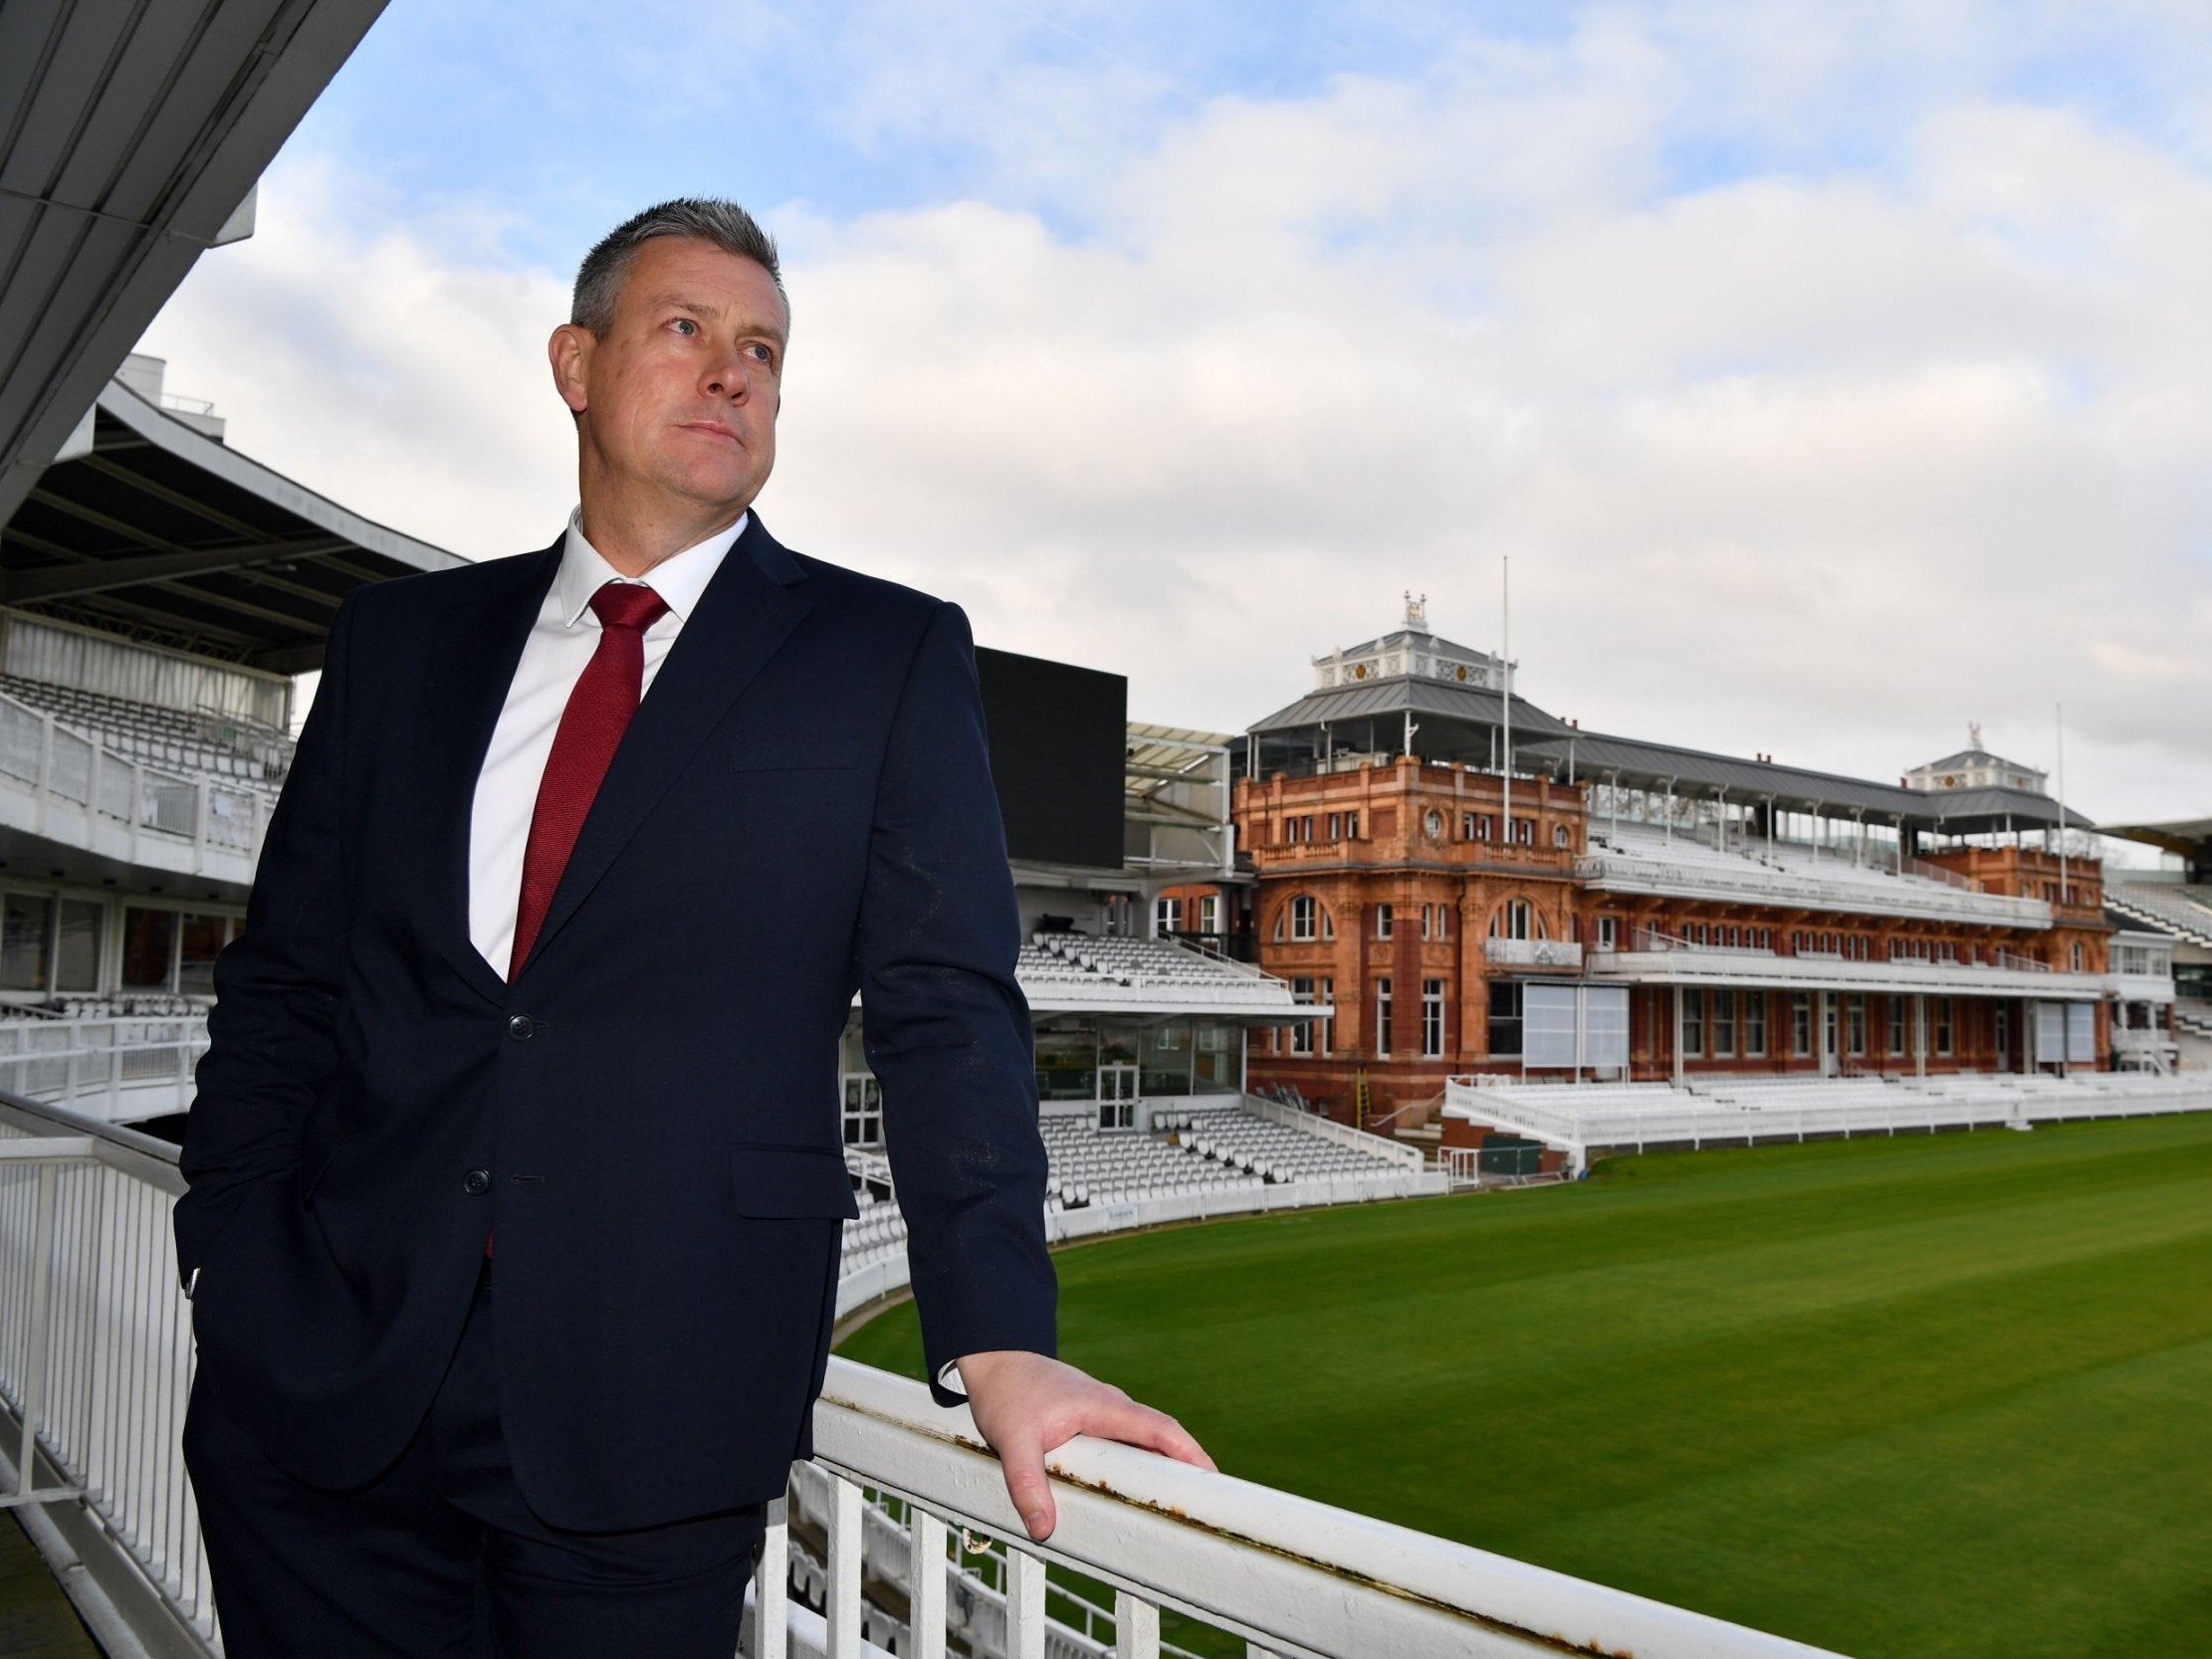 Ashley Giles has outlined his plan for England in 2019 after being named director of cricket